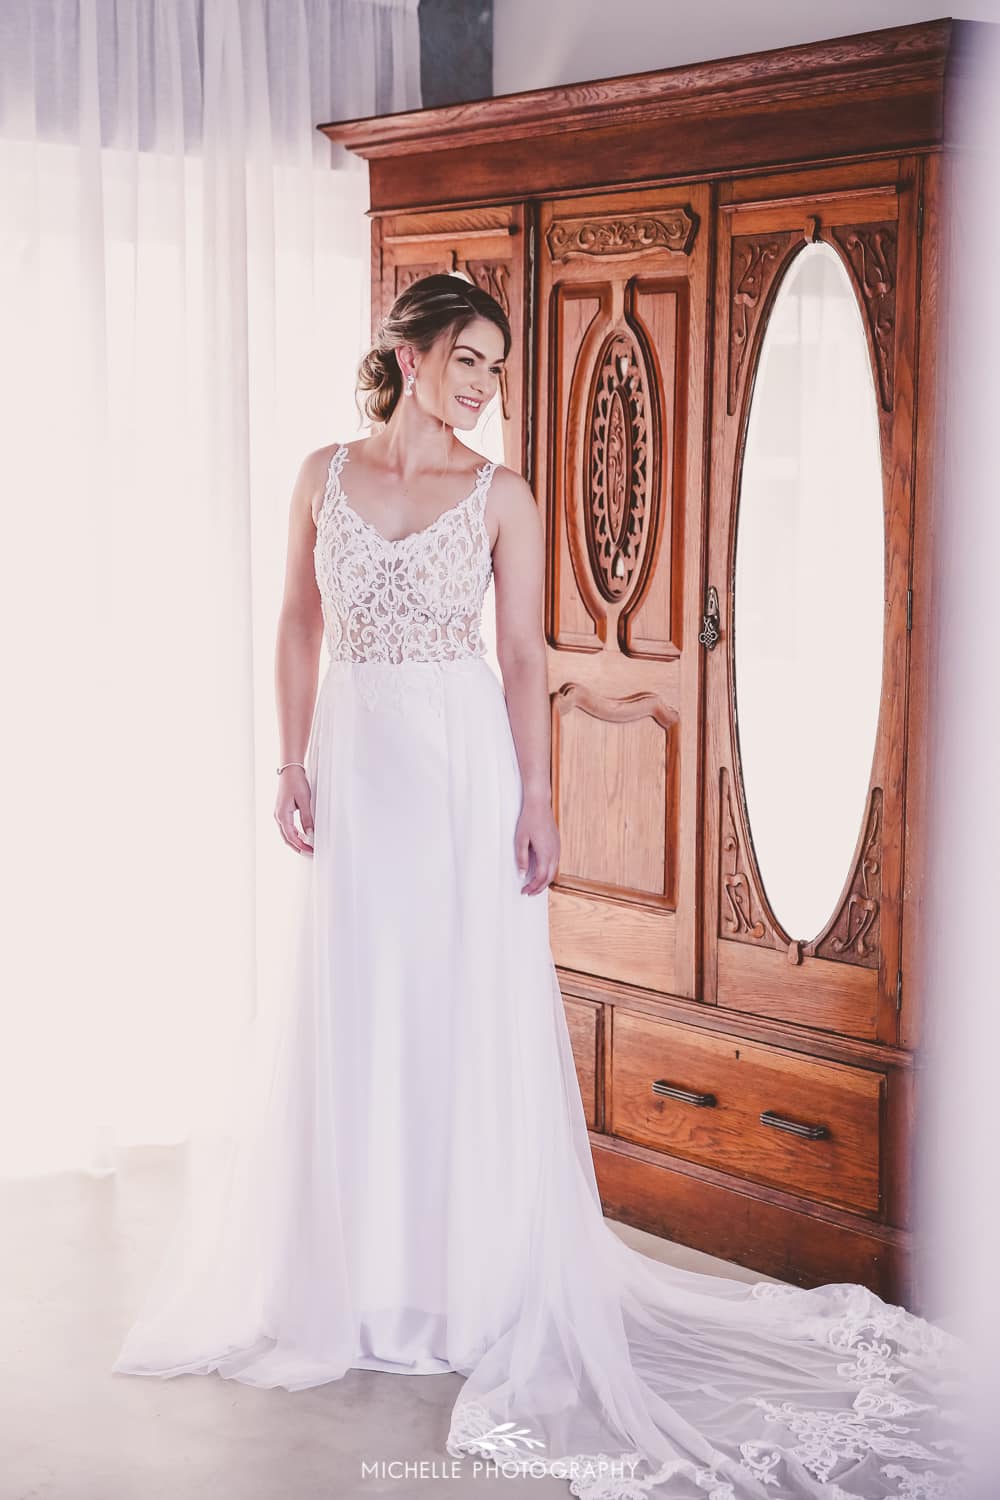 Micaela Sheer Lace Bodice Sheath Wedding Dress with a detachable tulle trail.